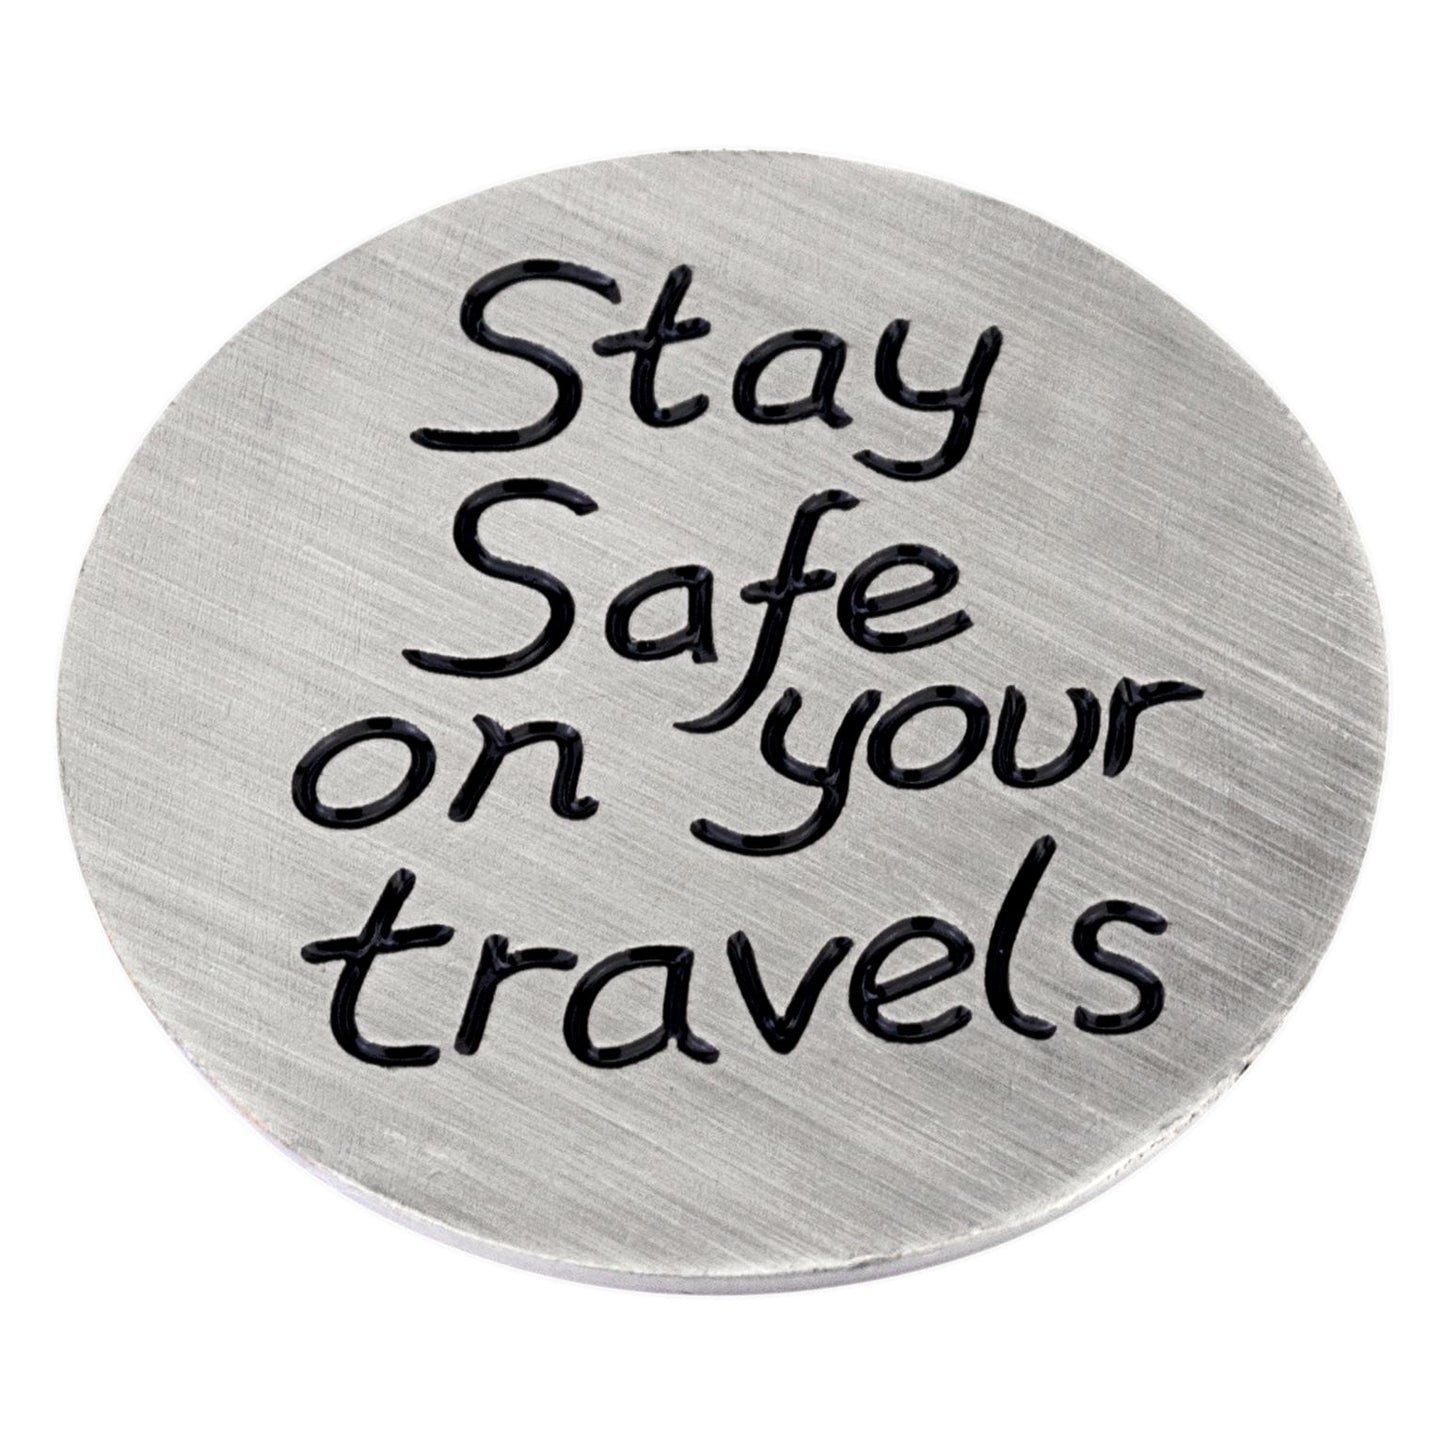 Travel Safely Compass Token on smart gift card